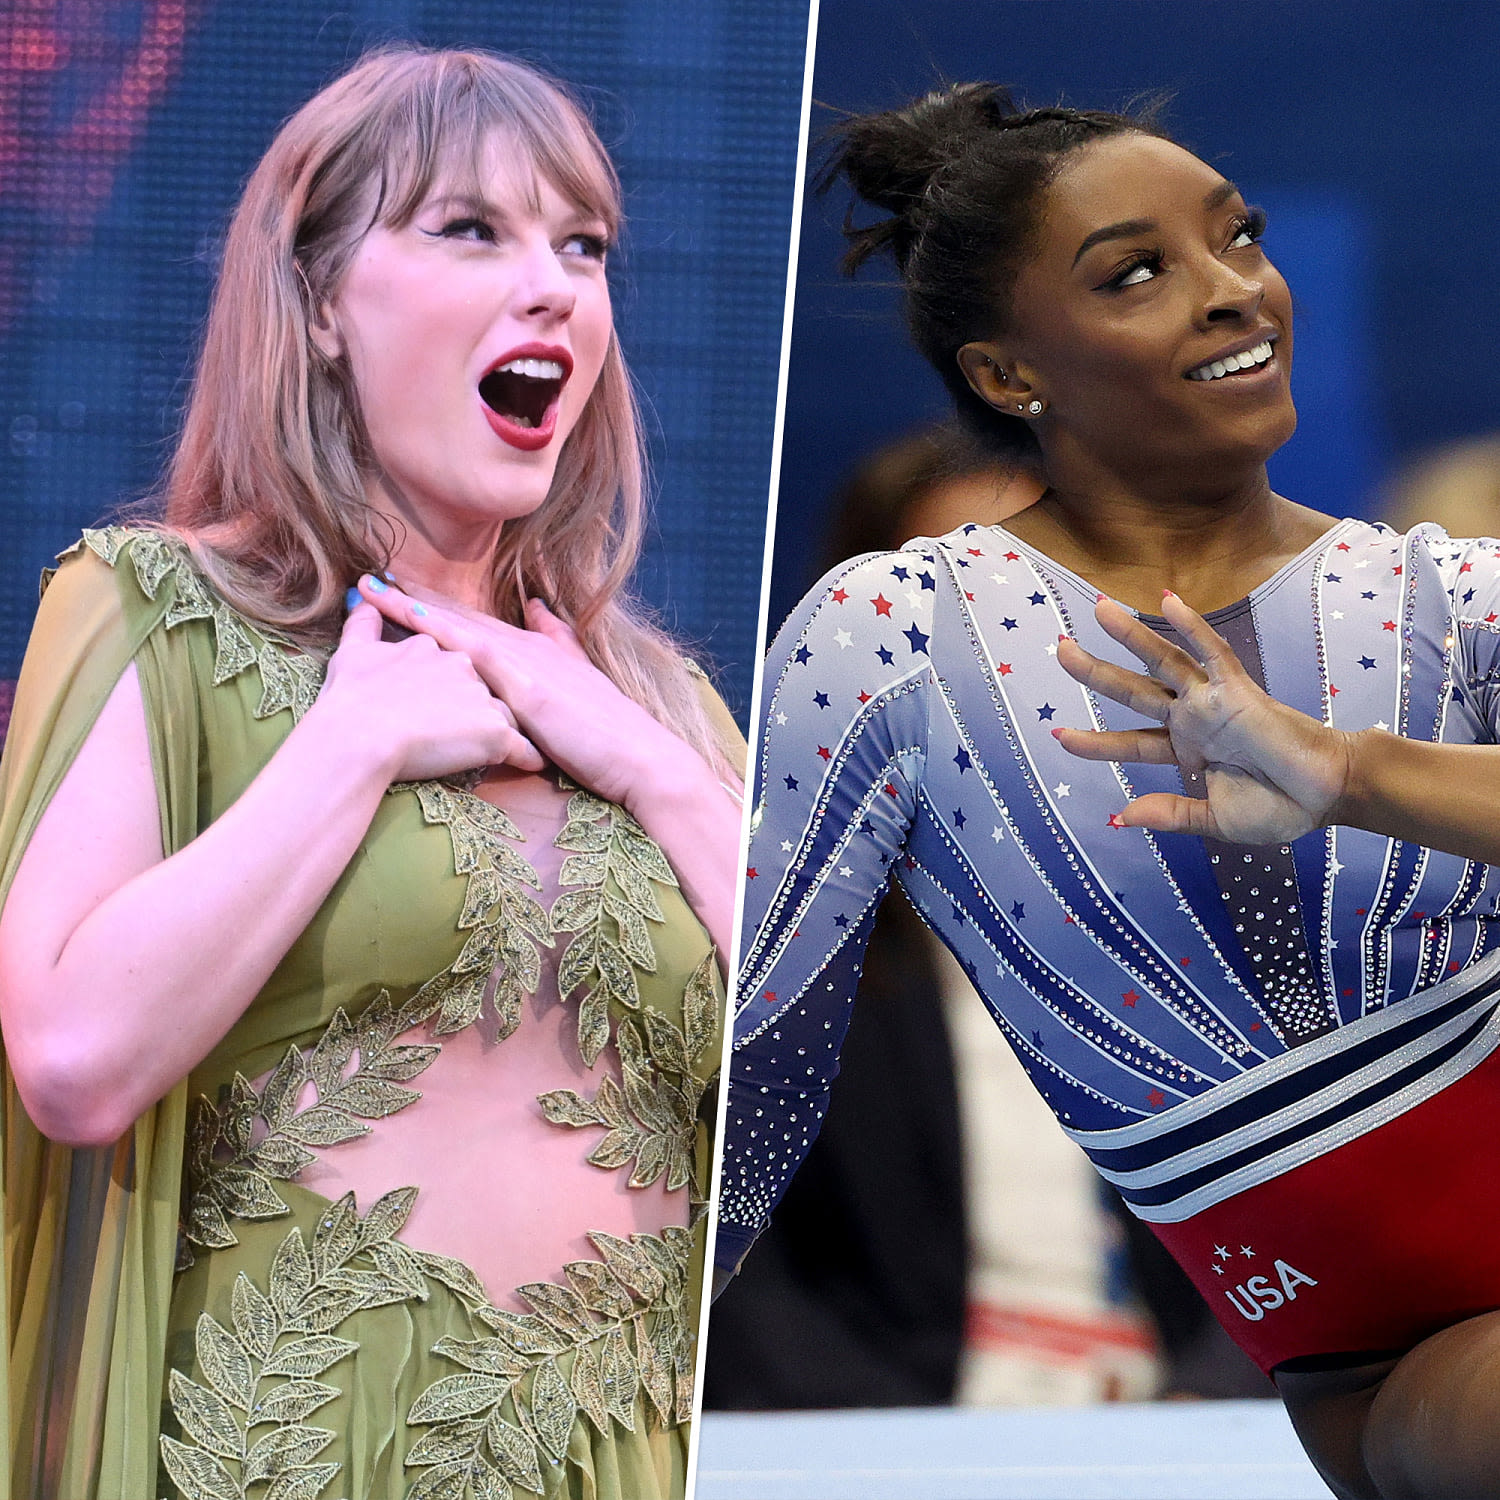 Taylor Swift reacts to Simone Biles’ floor routine featuring her song: ‘Watched this so many times’